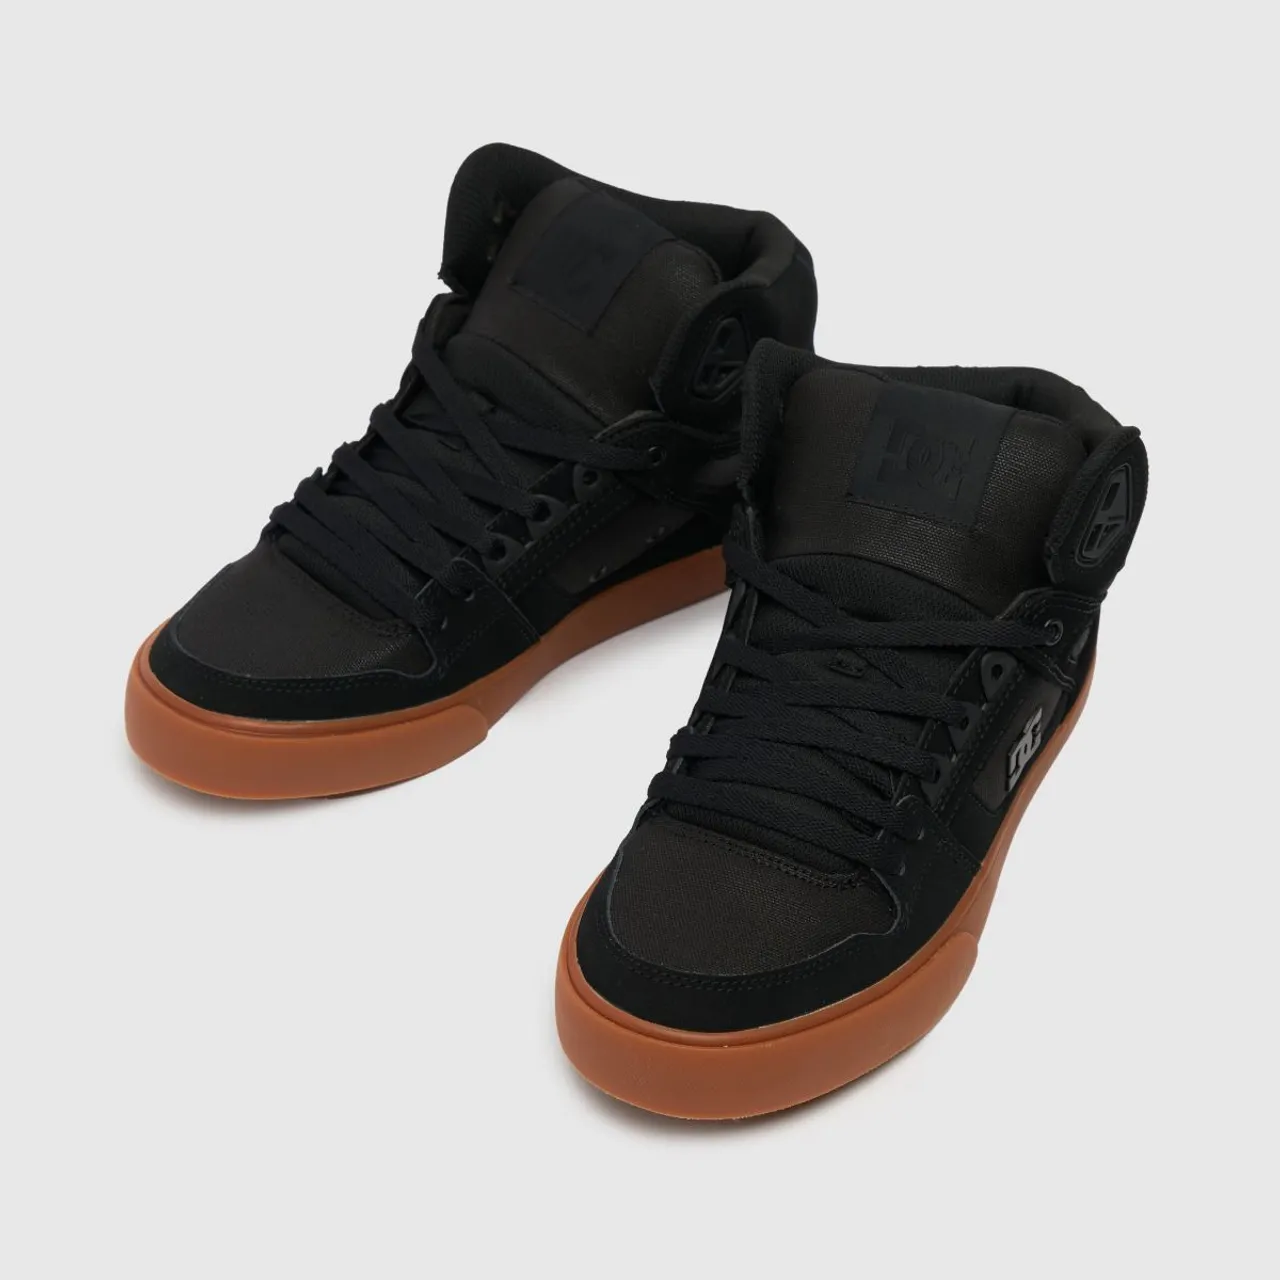 DC Pure High Top Wc Trainers In Black